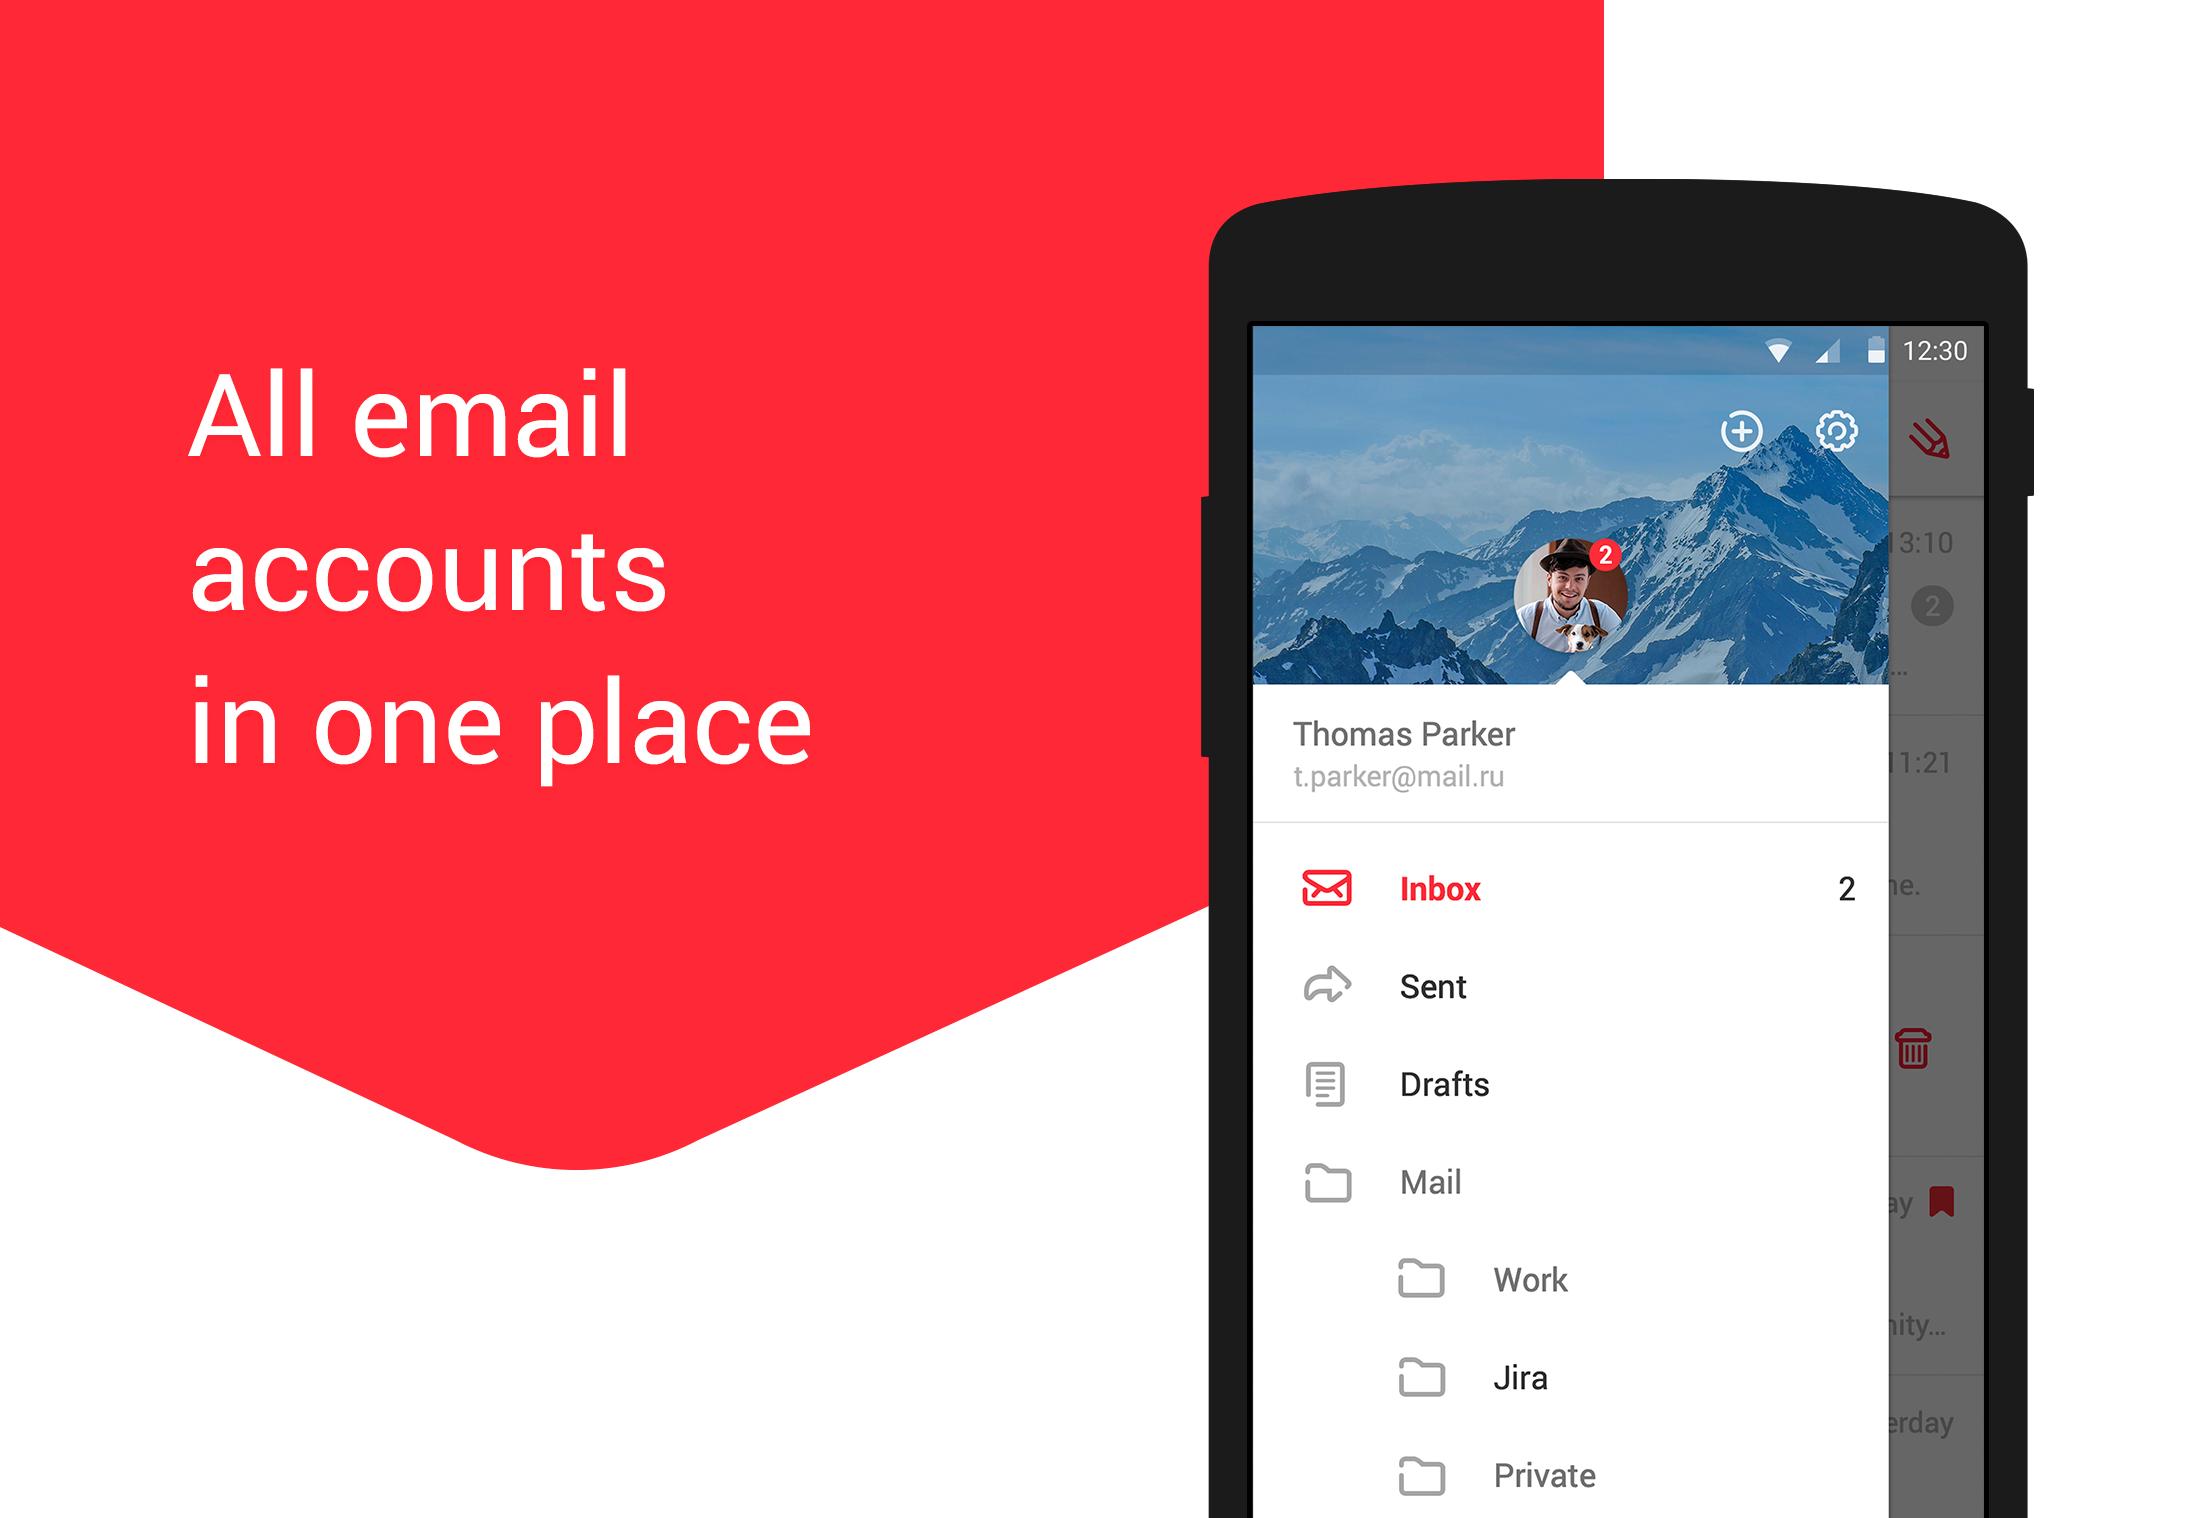 myMail: Email App for Gmail, Hotmail & AOL E-Mail